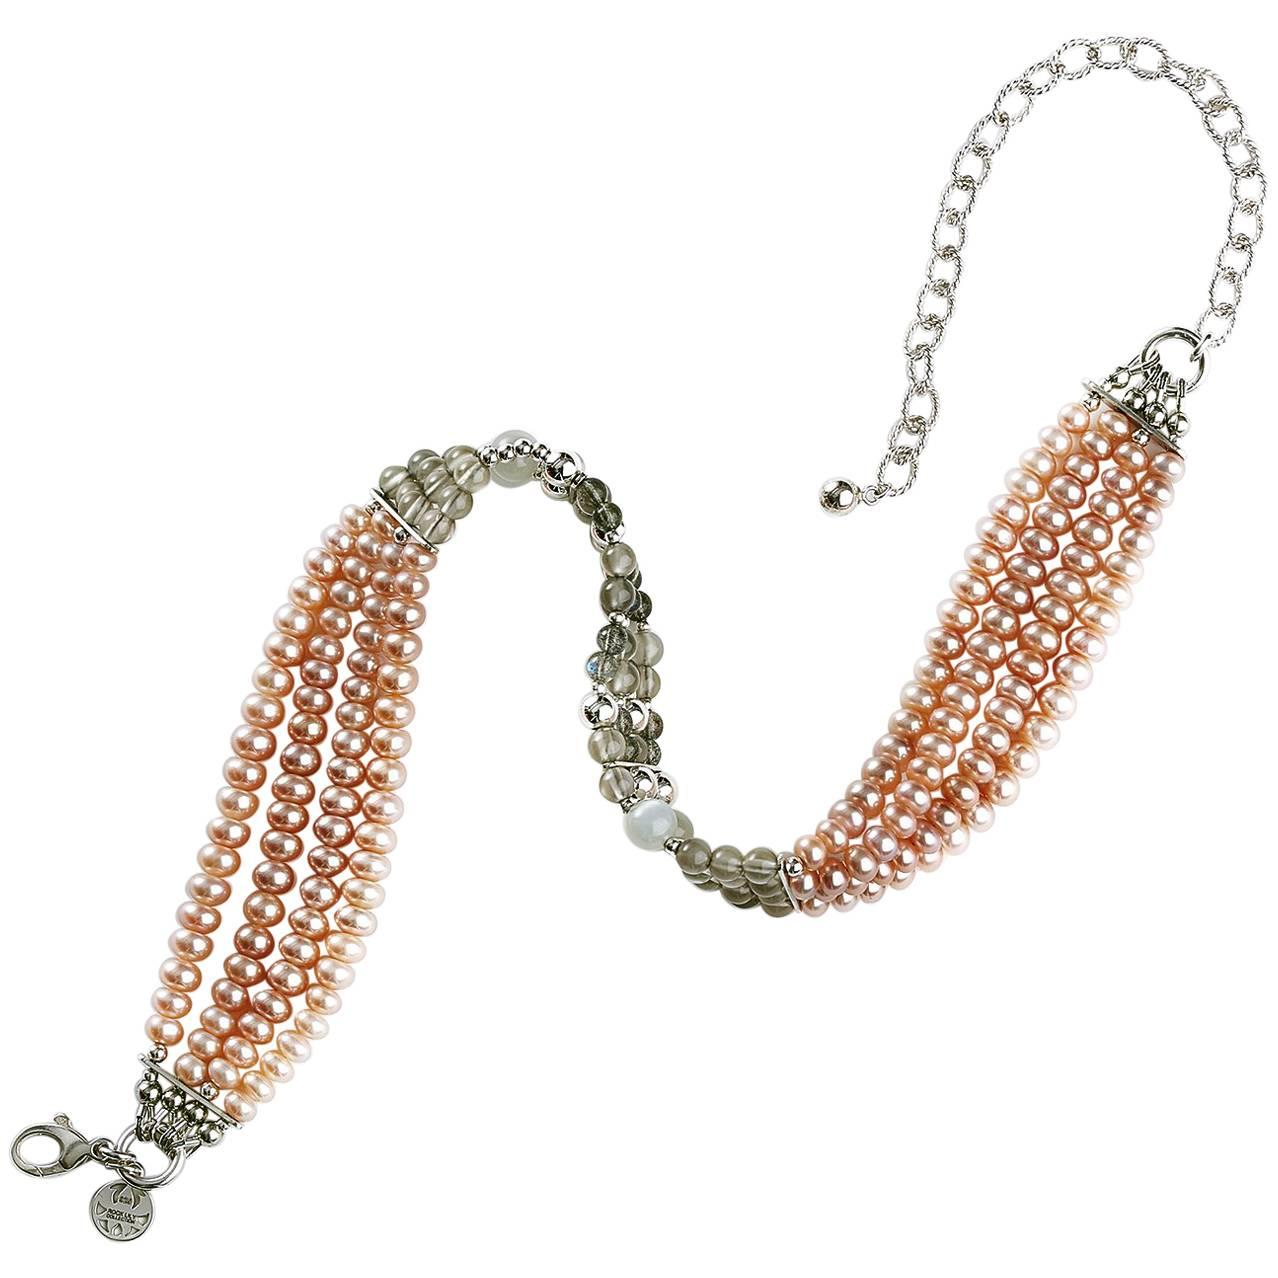 The choker is made up of peach cultured freshwater pearls, gray moonstone and labradorite beads with silver, barely visible near the stones. Elevating the necklace is a silver lobster lock and fancy extension chain 3 inches in length for easy